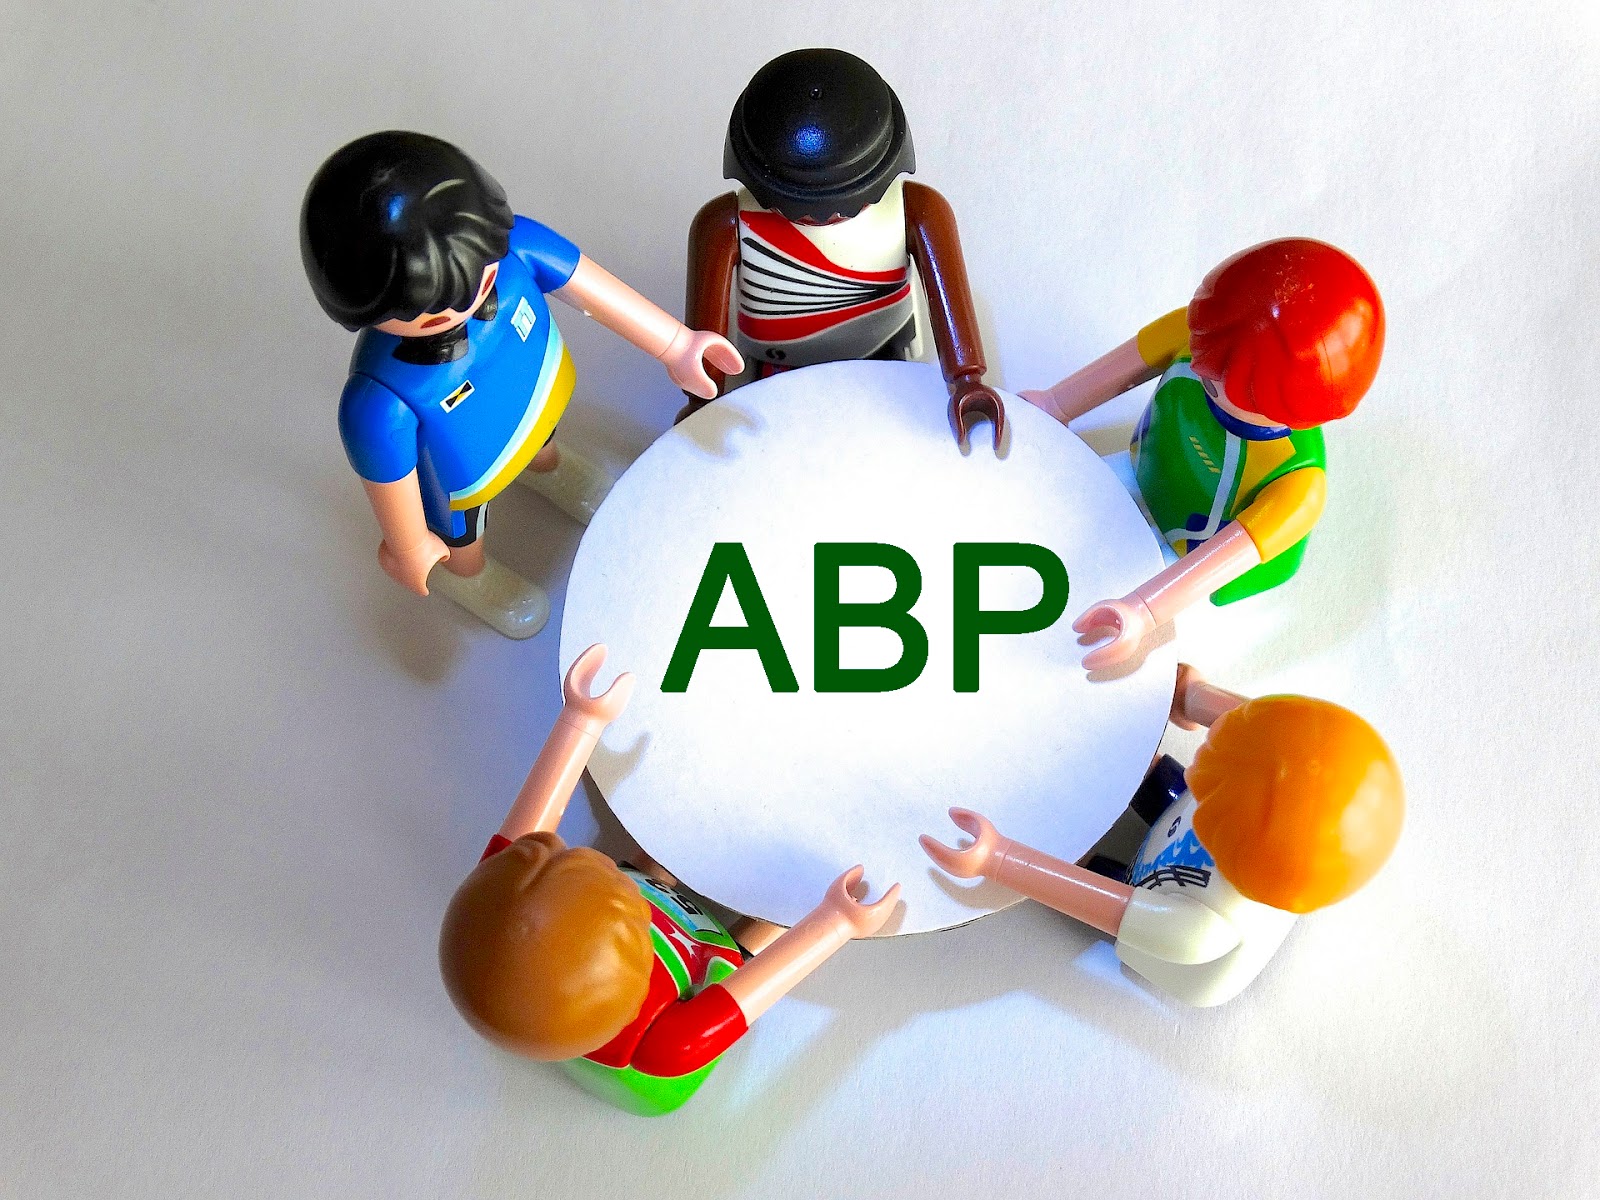 ABP in €50 million deal with Asian restaurant chain | Meat Management Magazine